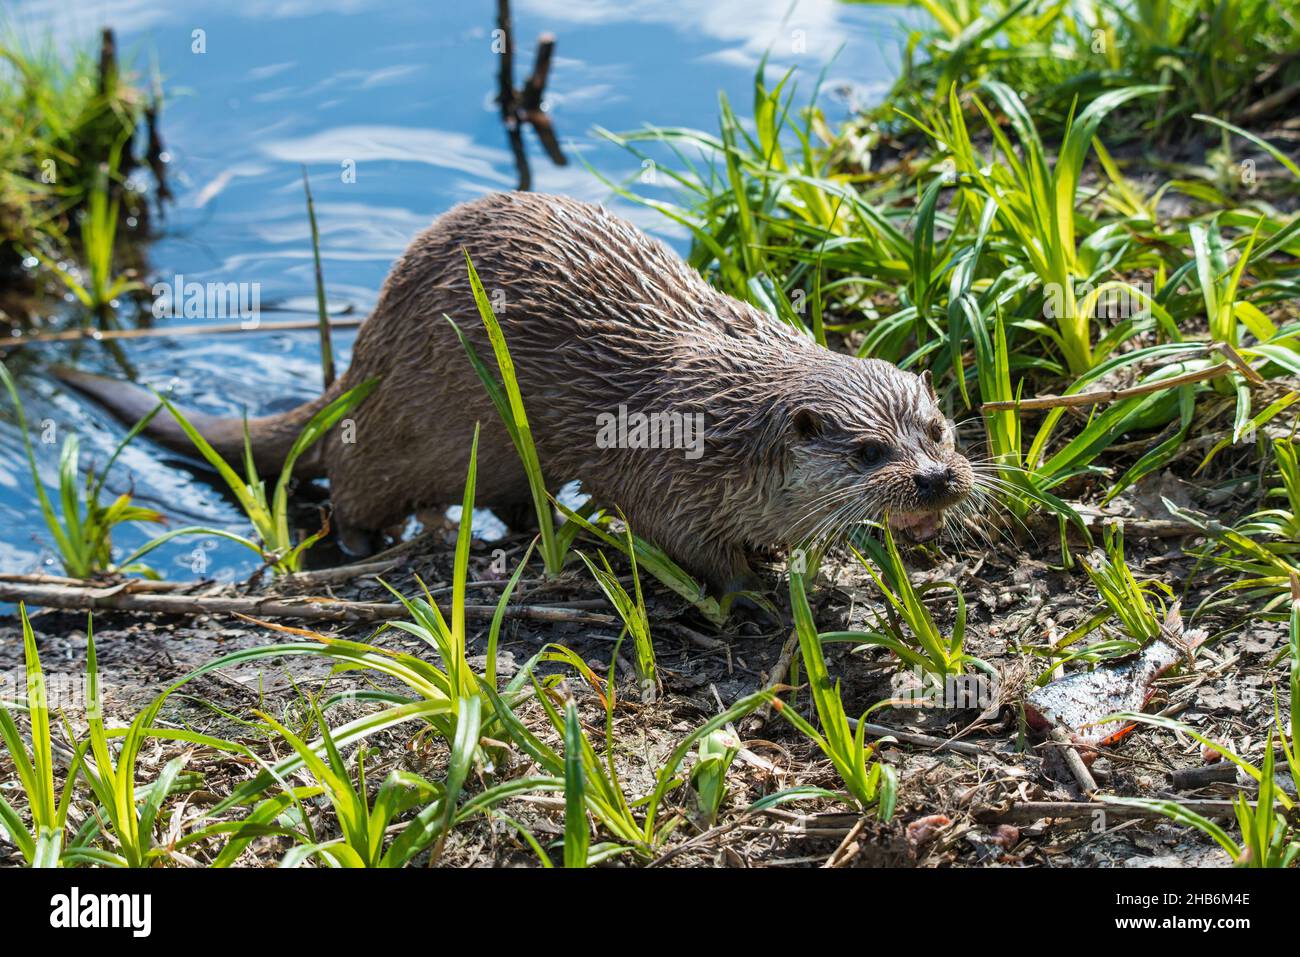 European river otter, European Otter, Eurasian Otter (Lutra lutra), comes out of water, Germany Stock Photo